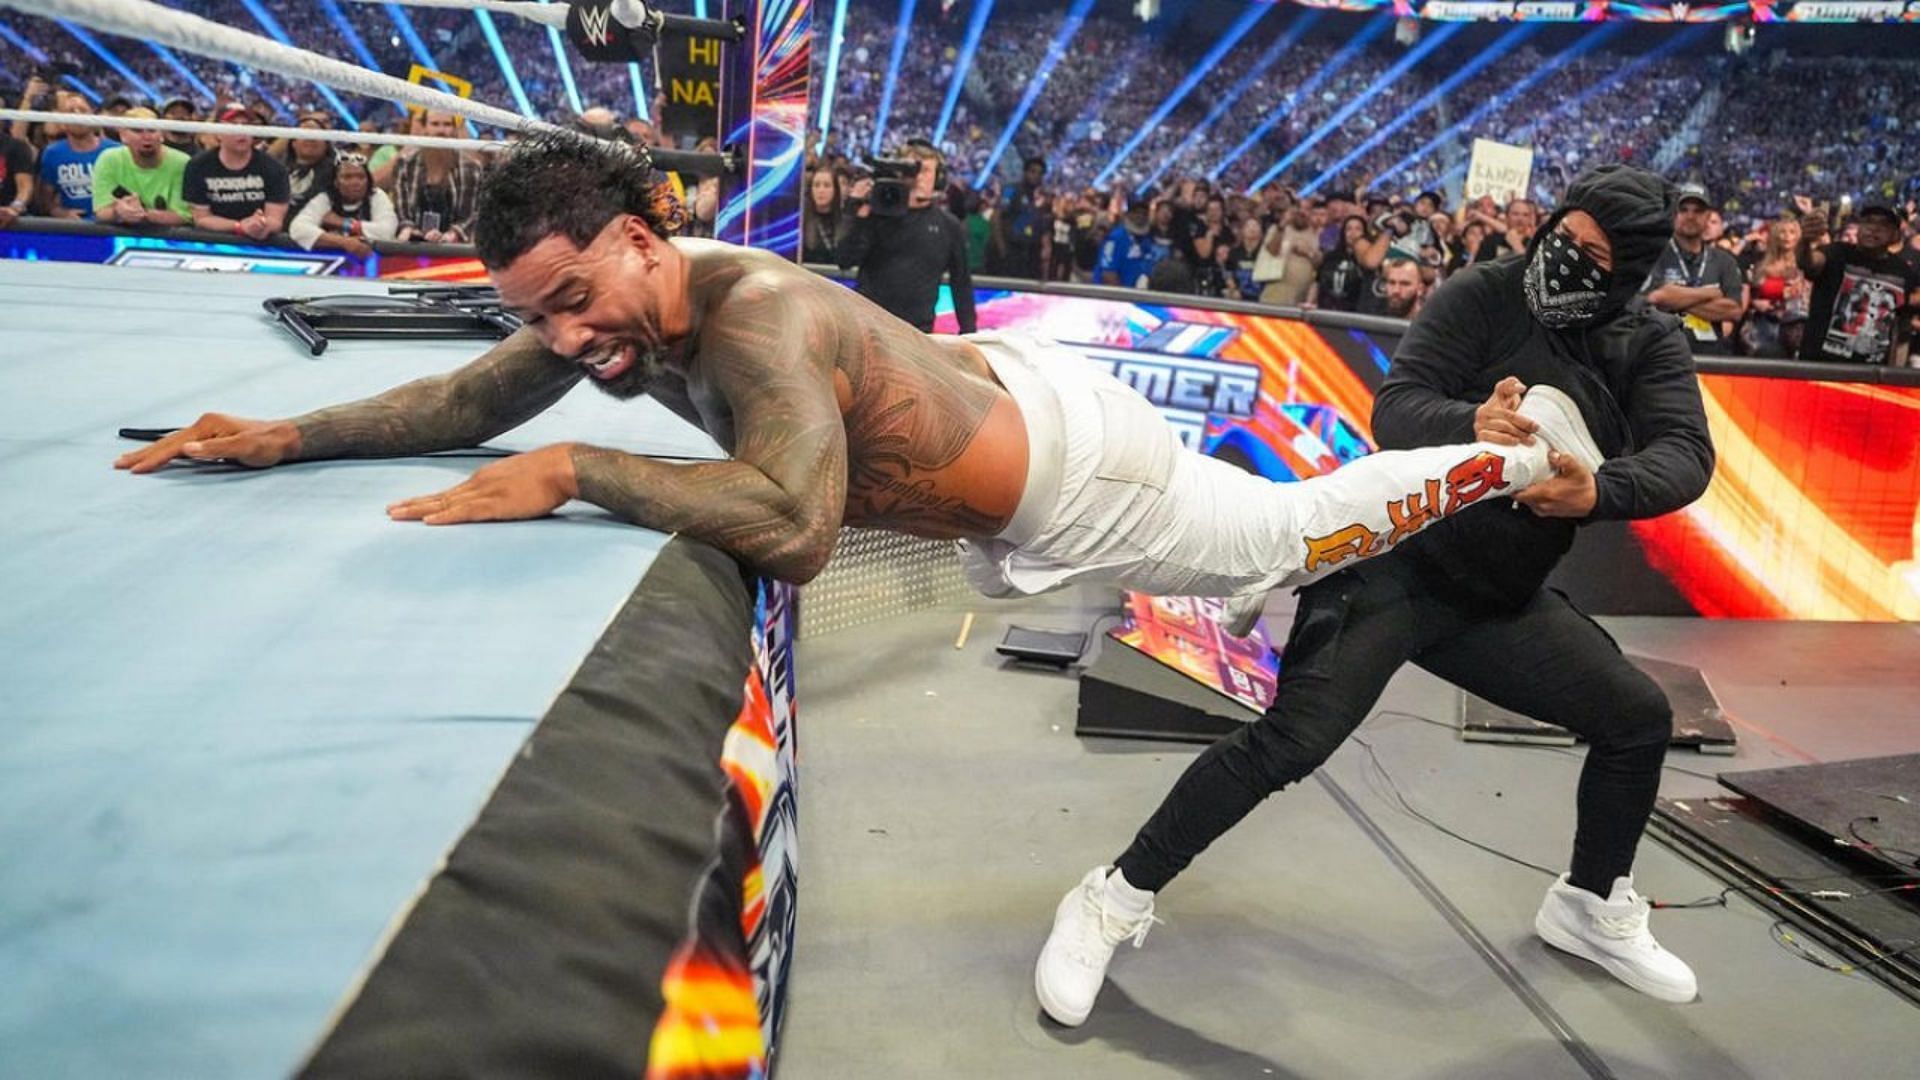 Jimmy Uso turned on his brother Jey Uso at Summerslam